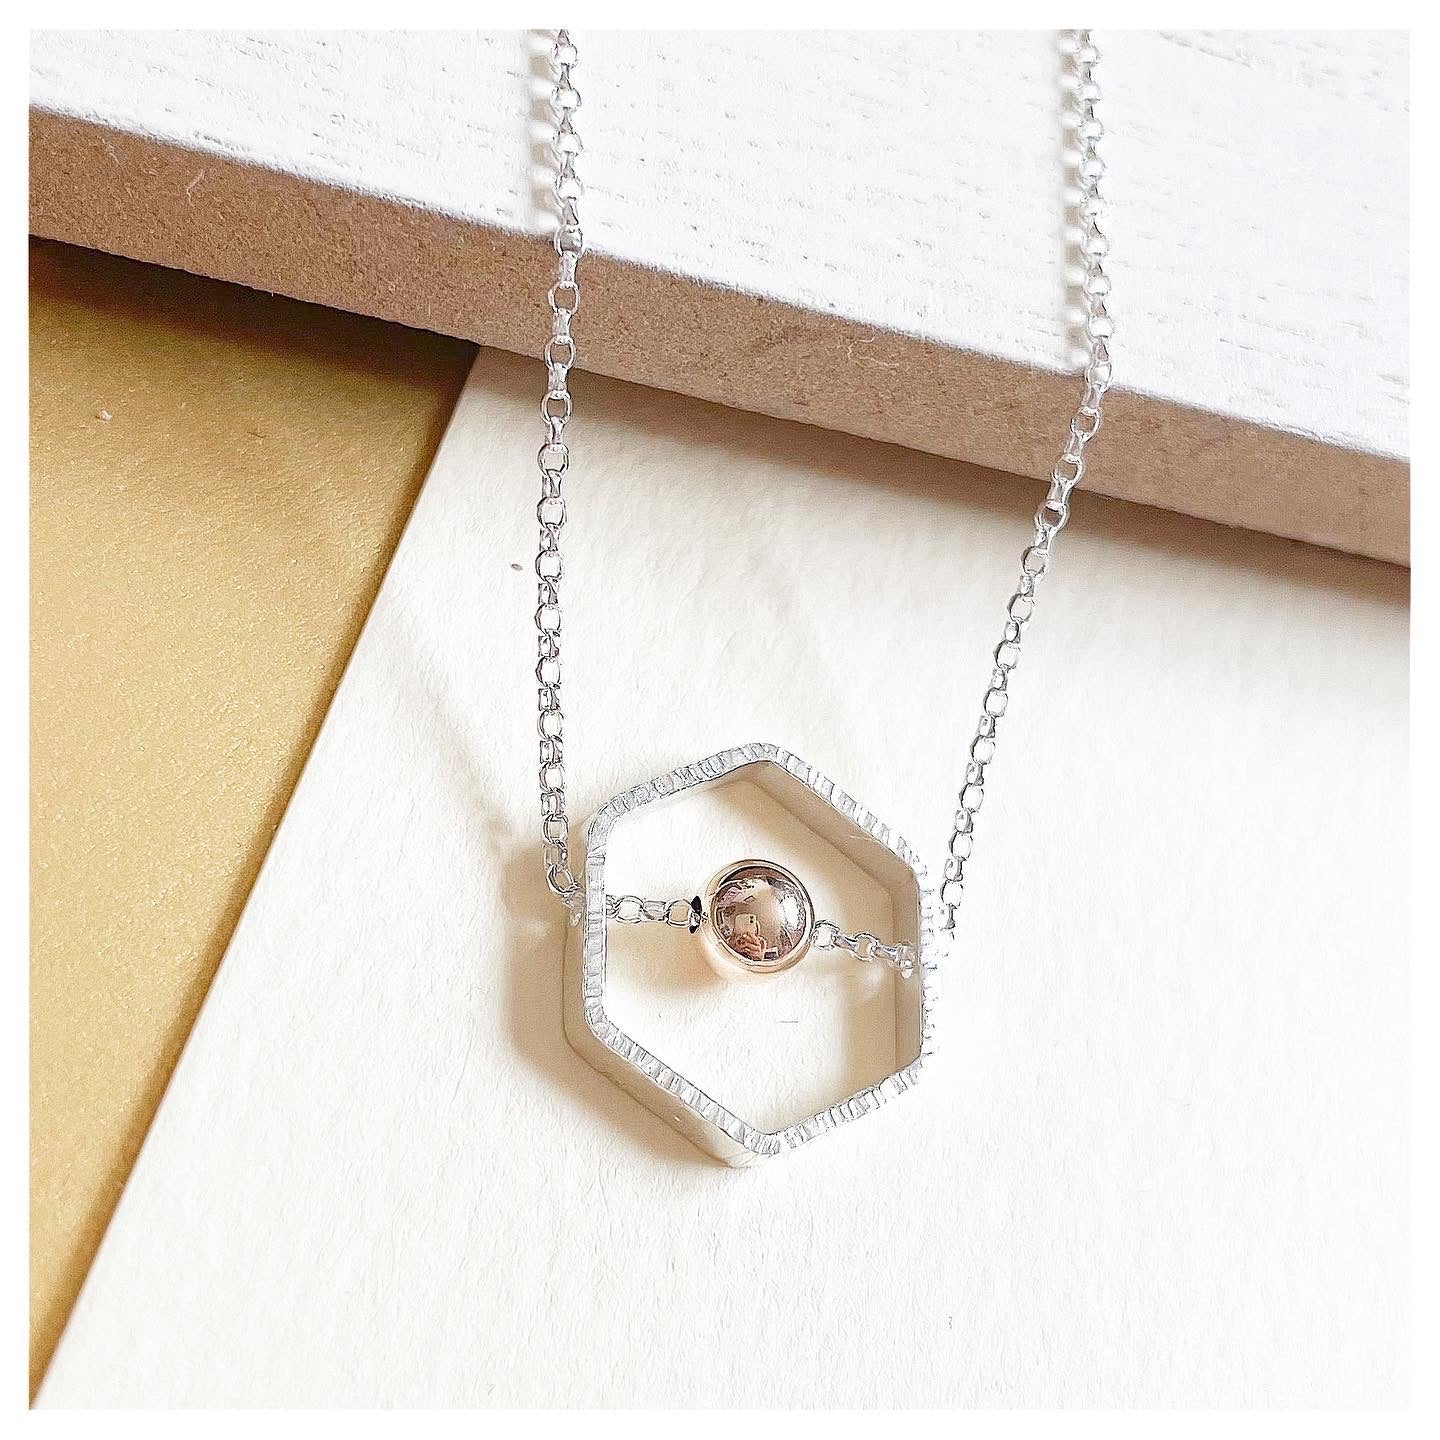 9ct Yellow Gold and Sterling Silver Hexagonal Necklace with Bead